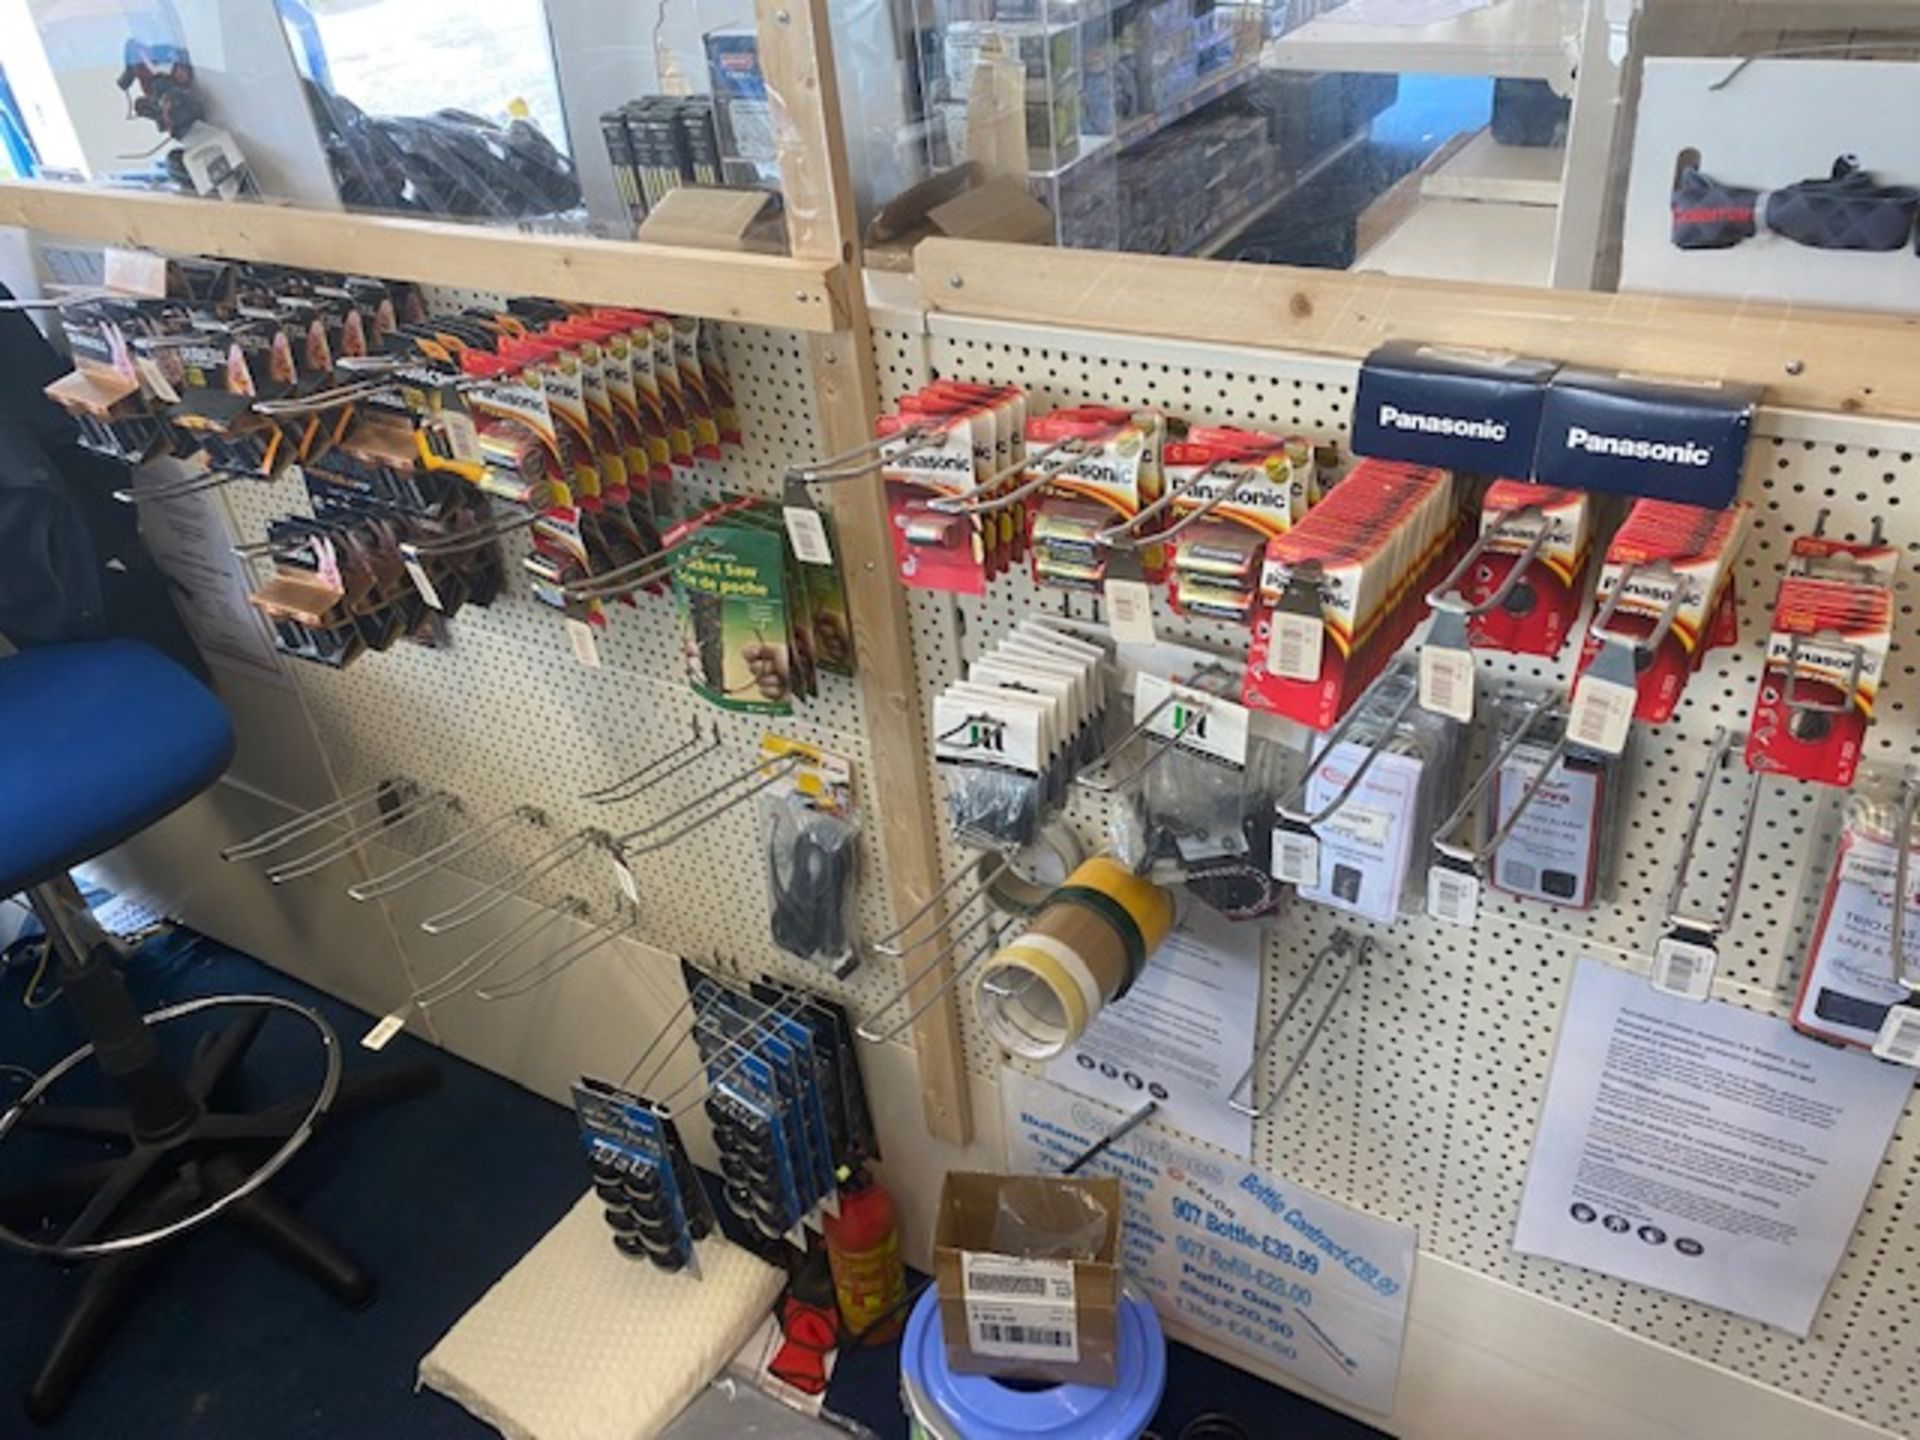 Contents of display unit to include a quantity of Duracell & Panasonic batteries as lotted